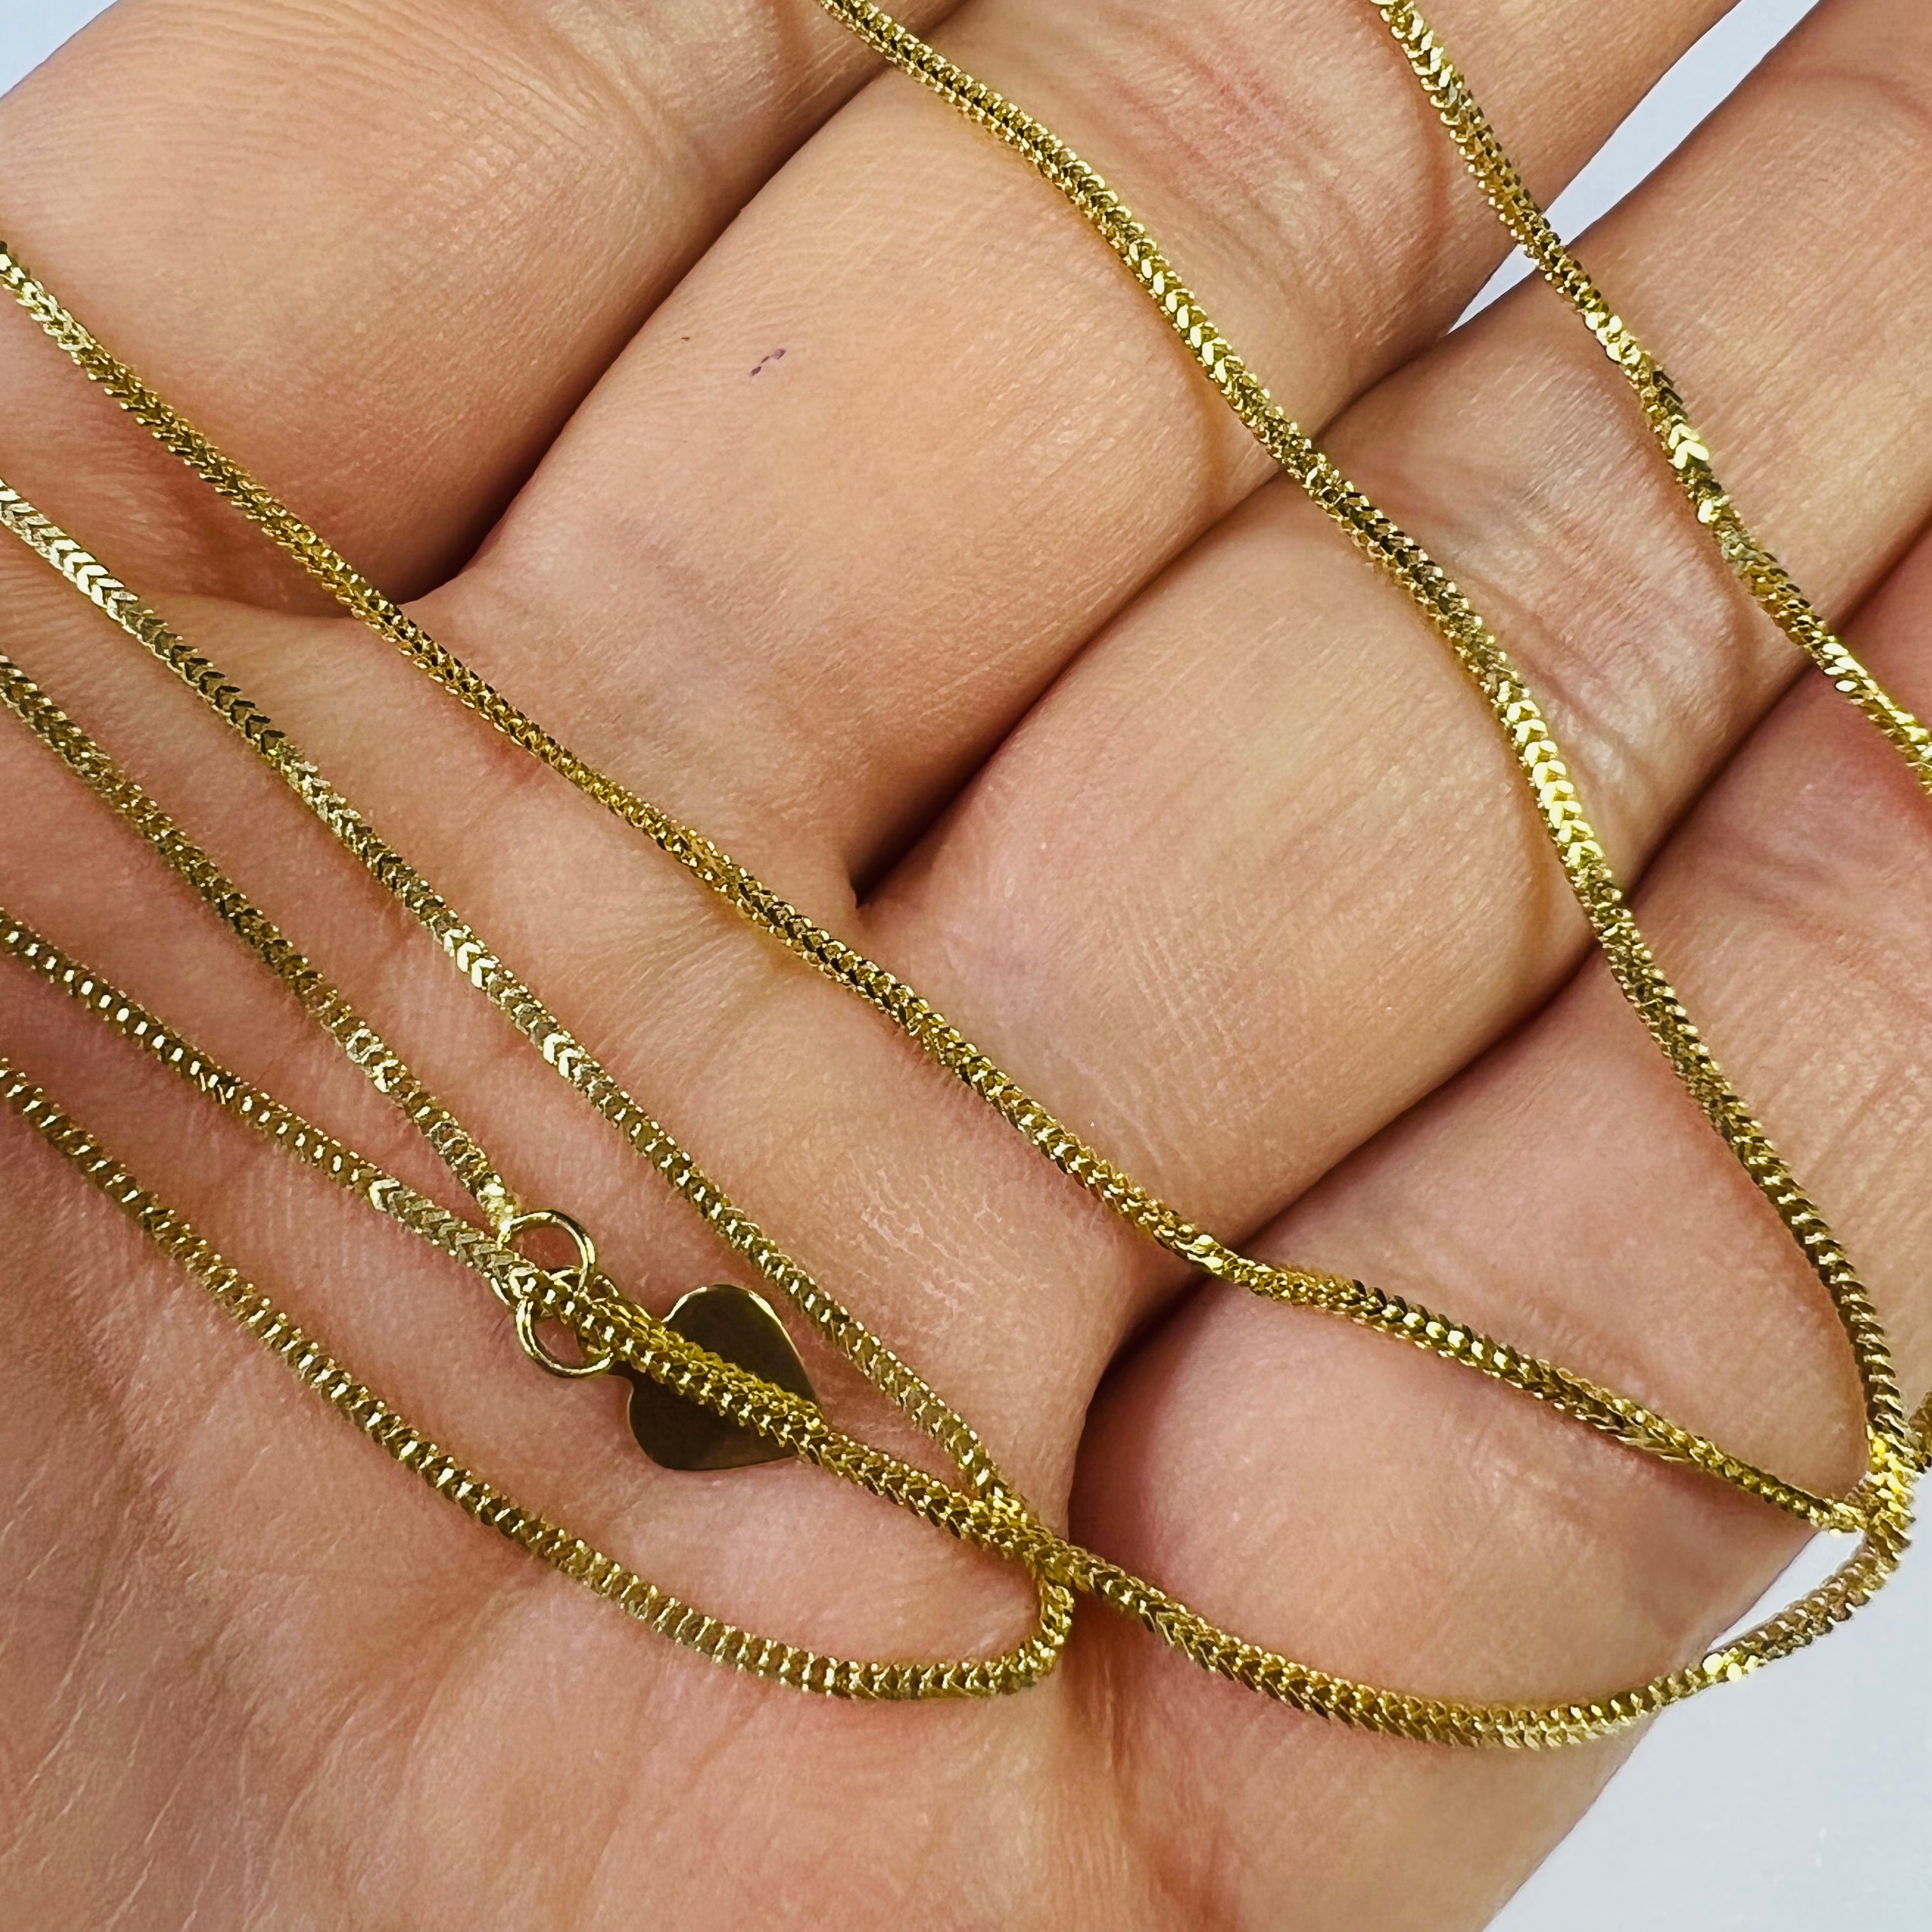 22" 14K Yellow Gold Adjustable Snake Chain Necklace